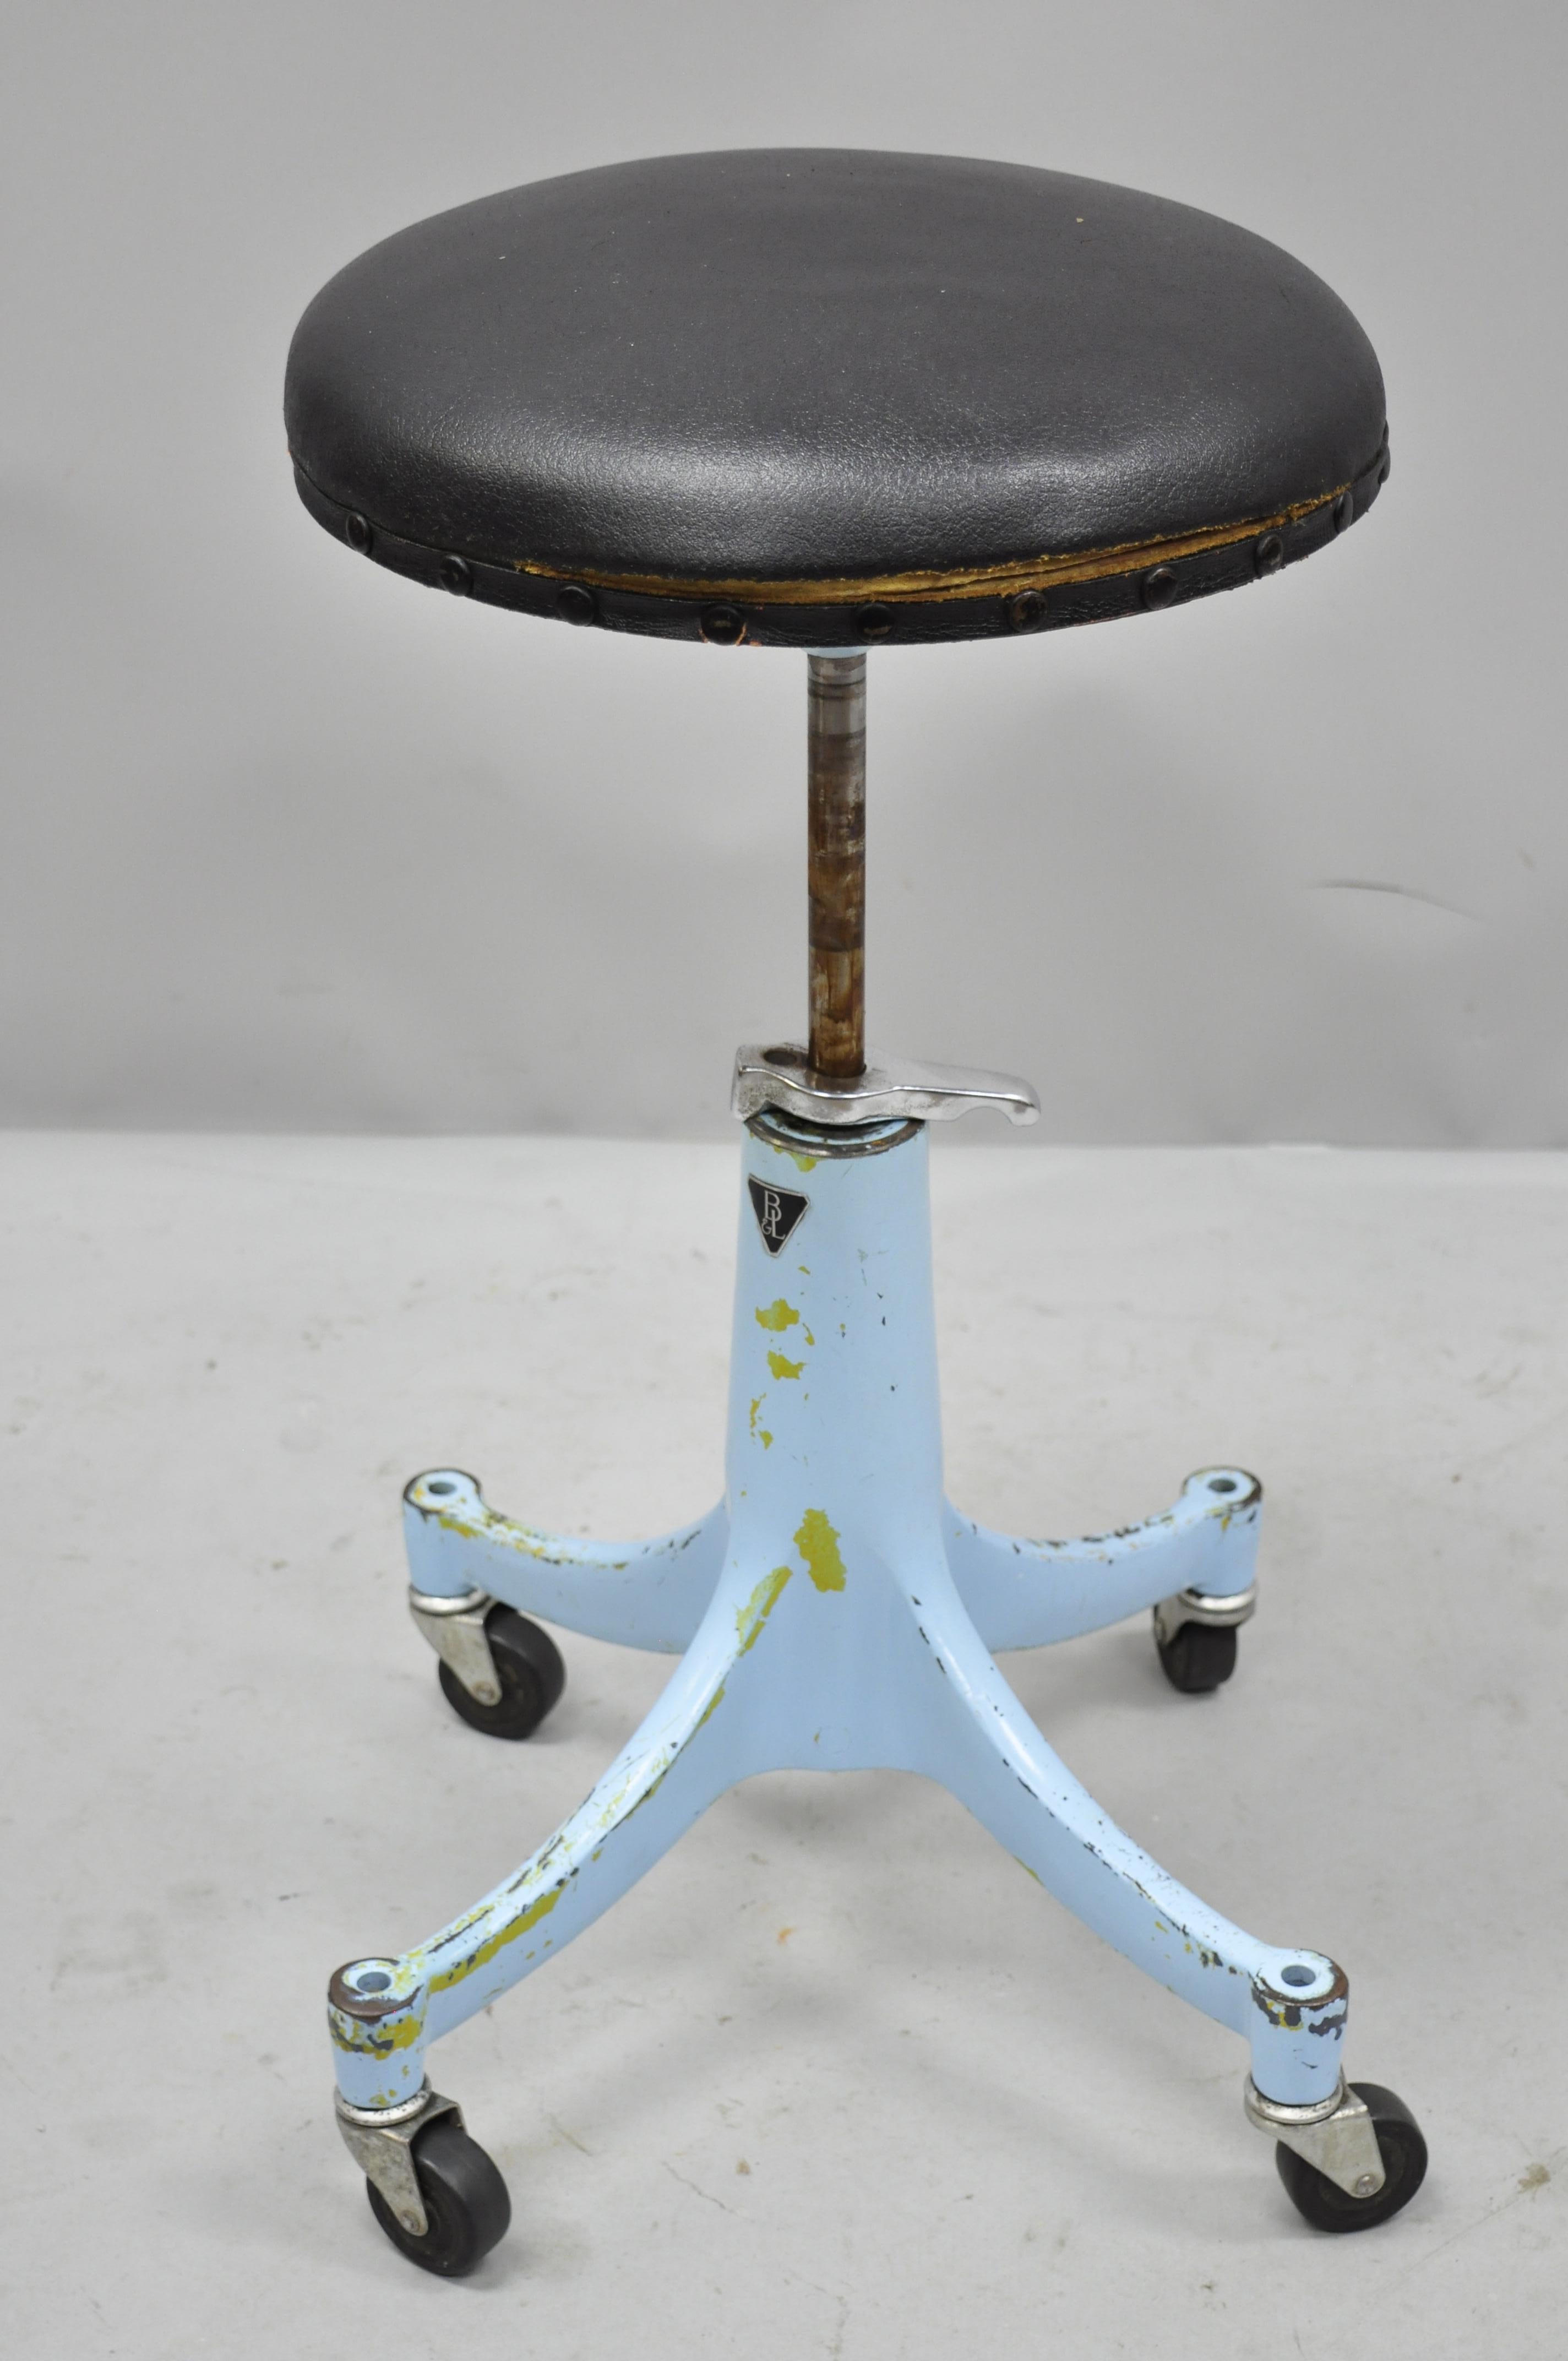 1930s medical stool on casters